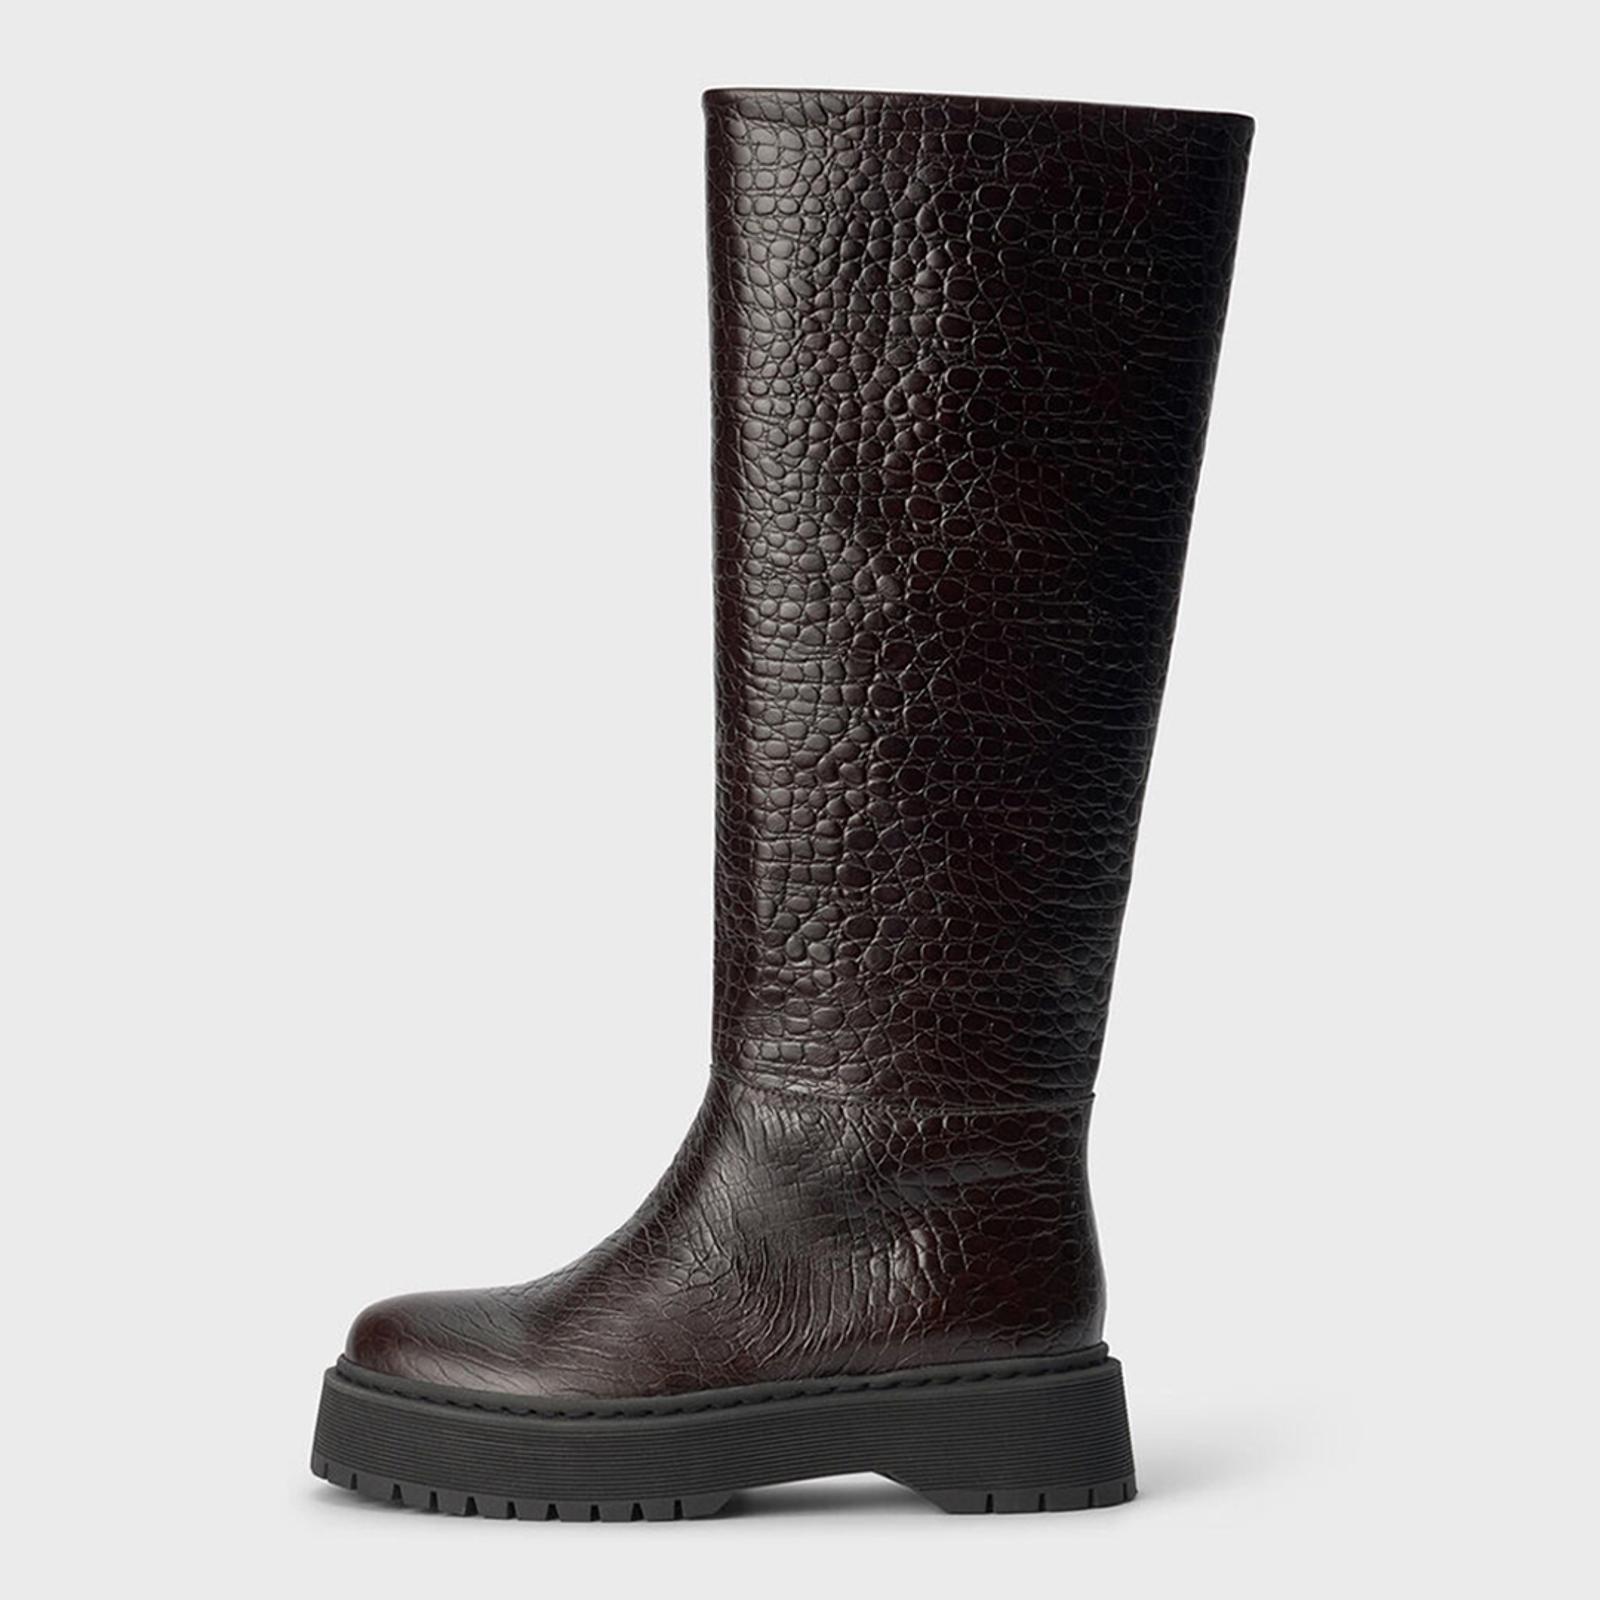 Mahogany Sarla Embossed Leather Knee-High Boots - BrandAlley